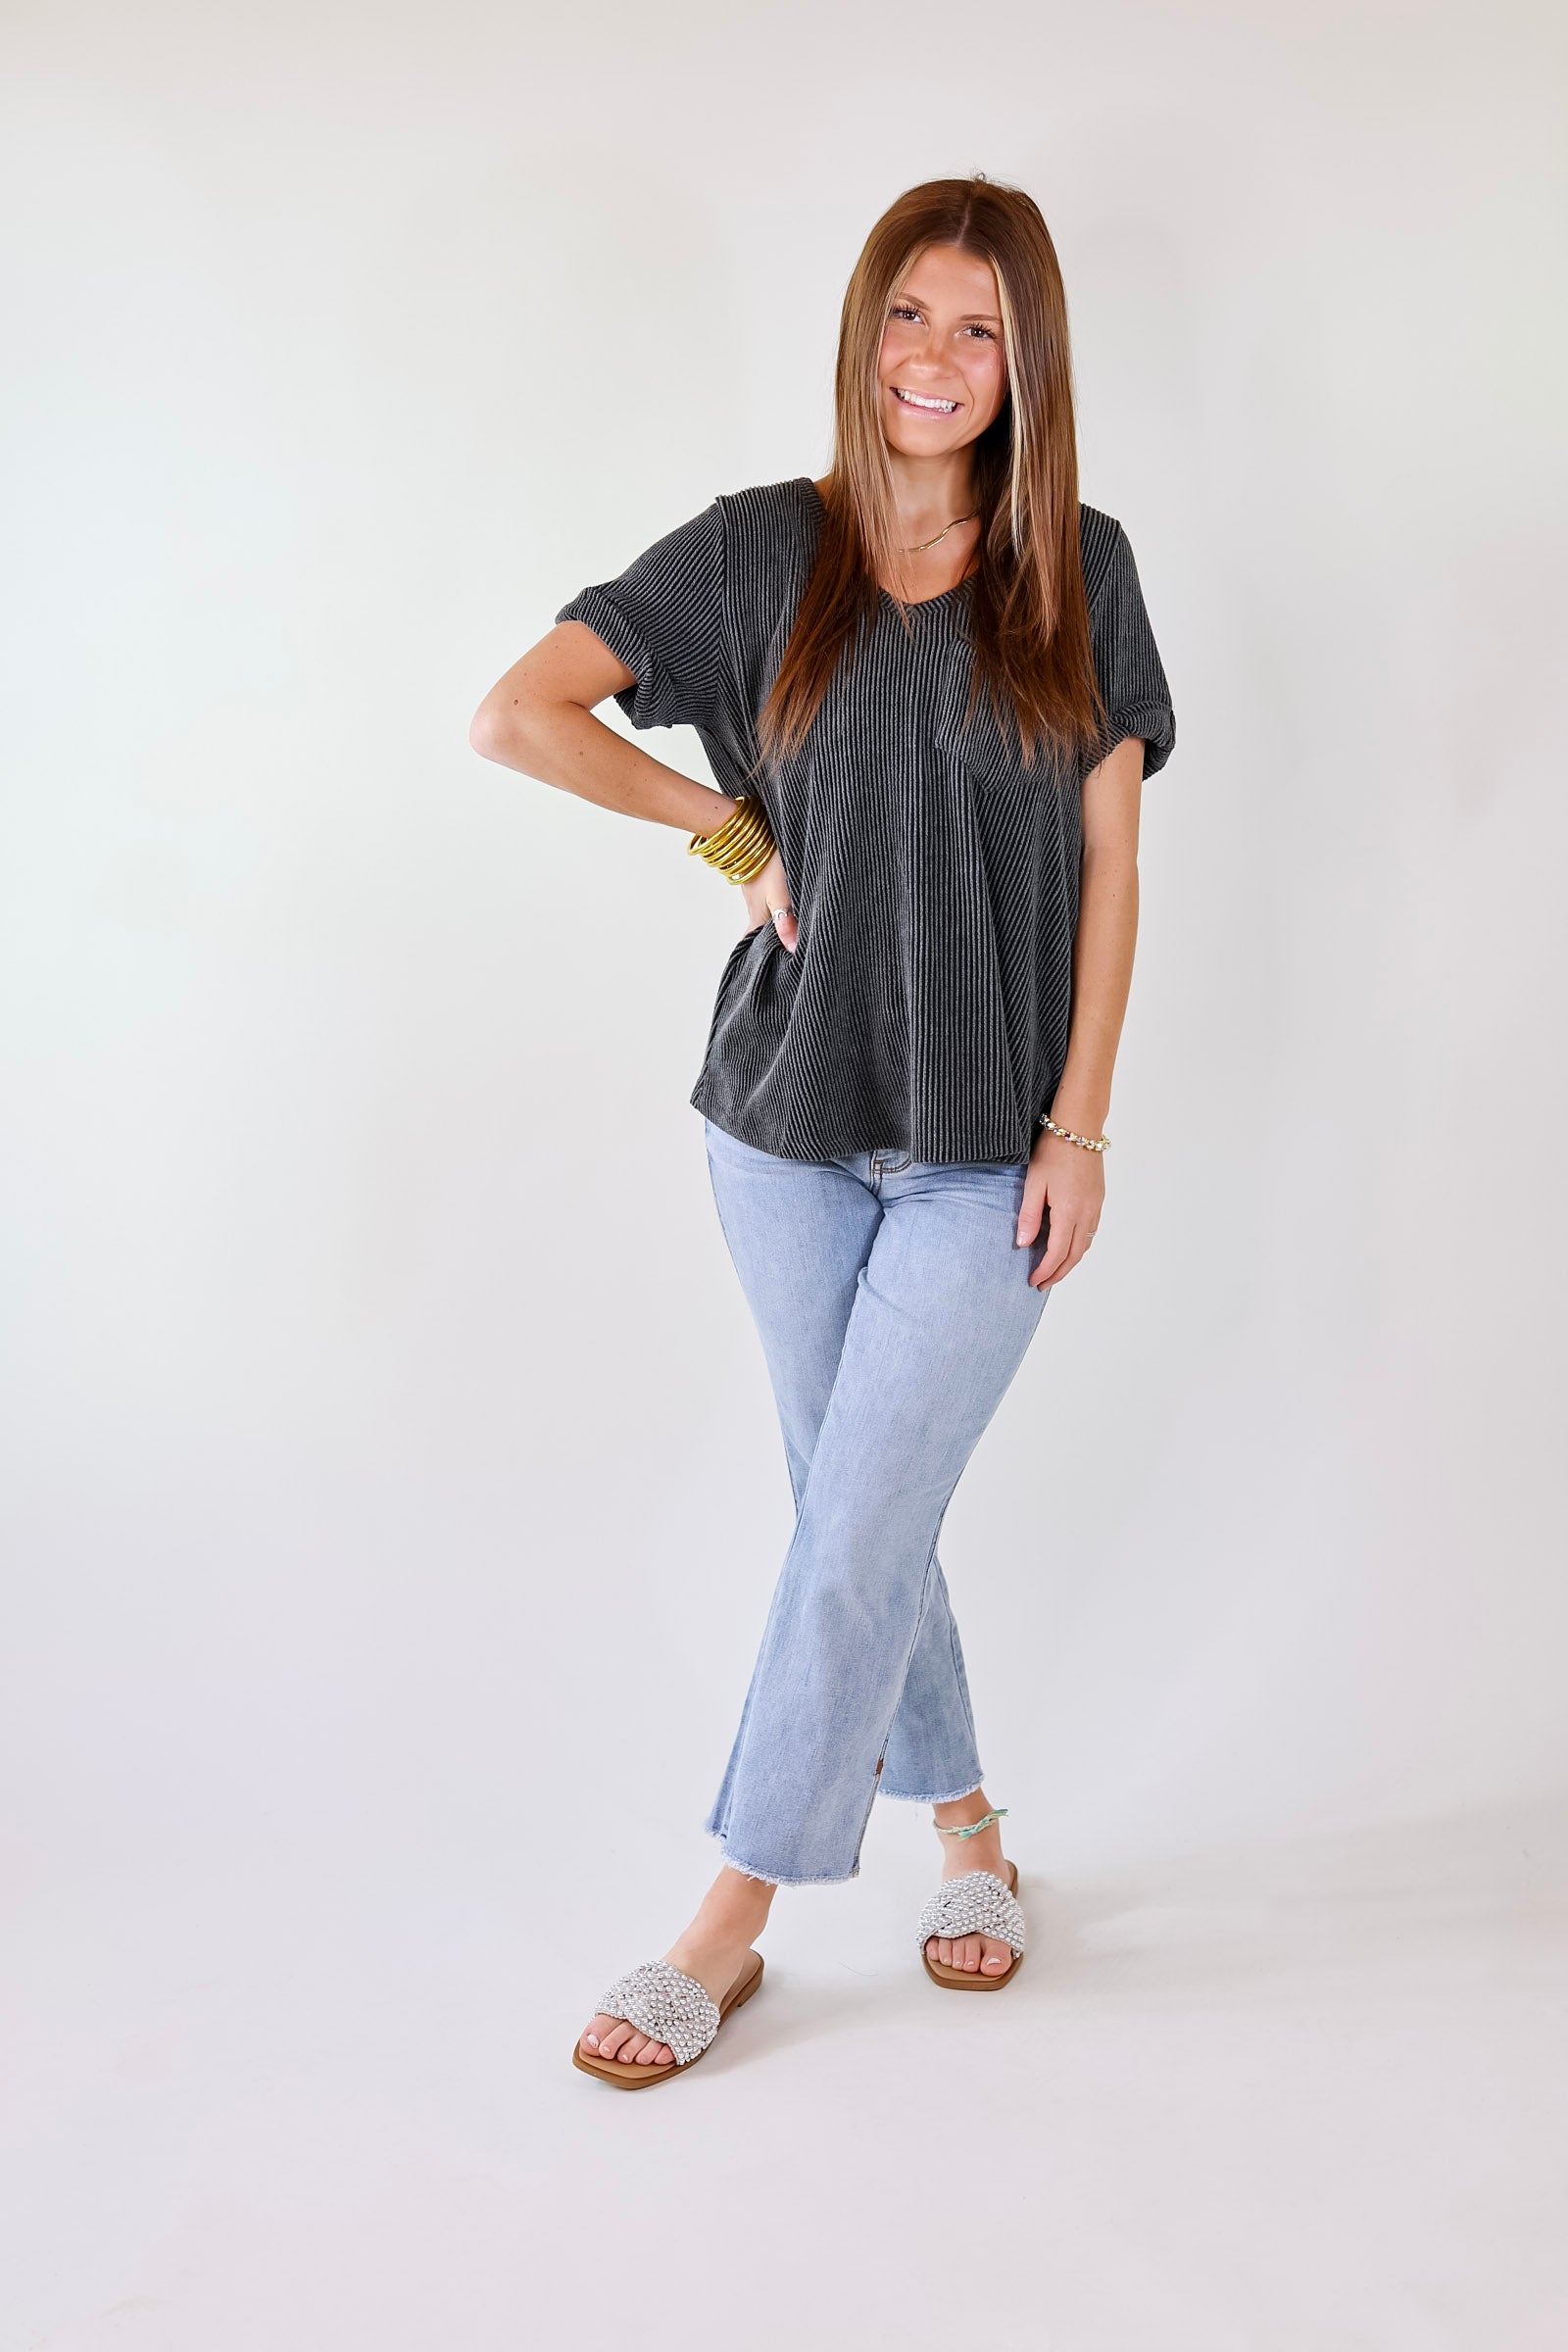 Only True Love Ribbed Short Sleeve Top with Front Pocket in Charcoal Black - Giddy Up Glamour Boutique